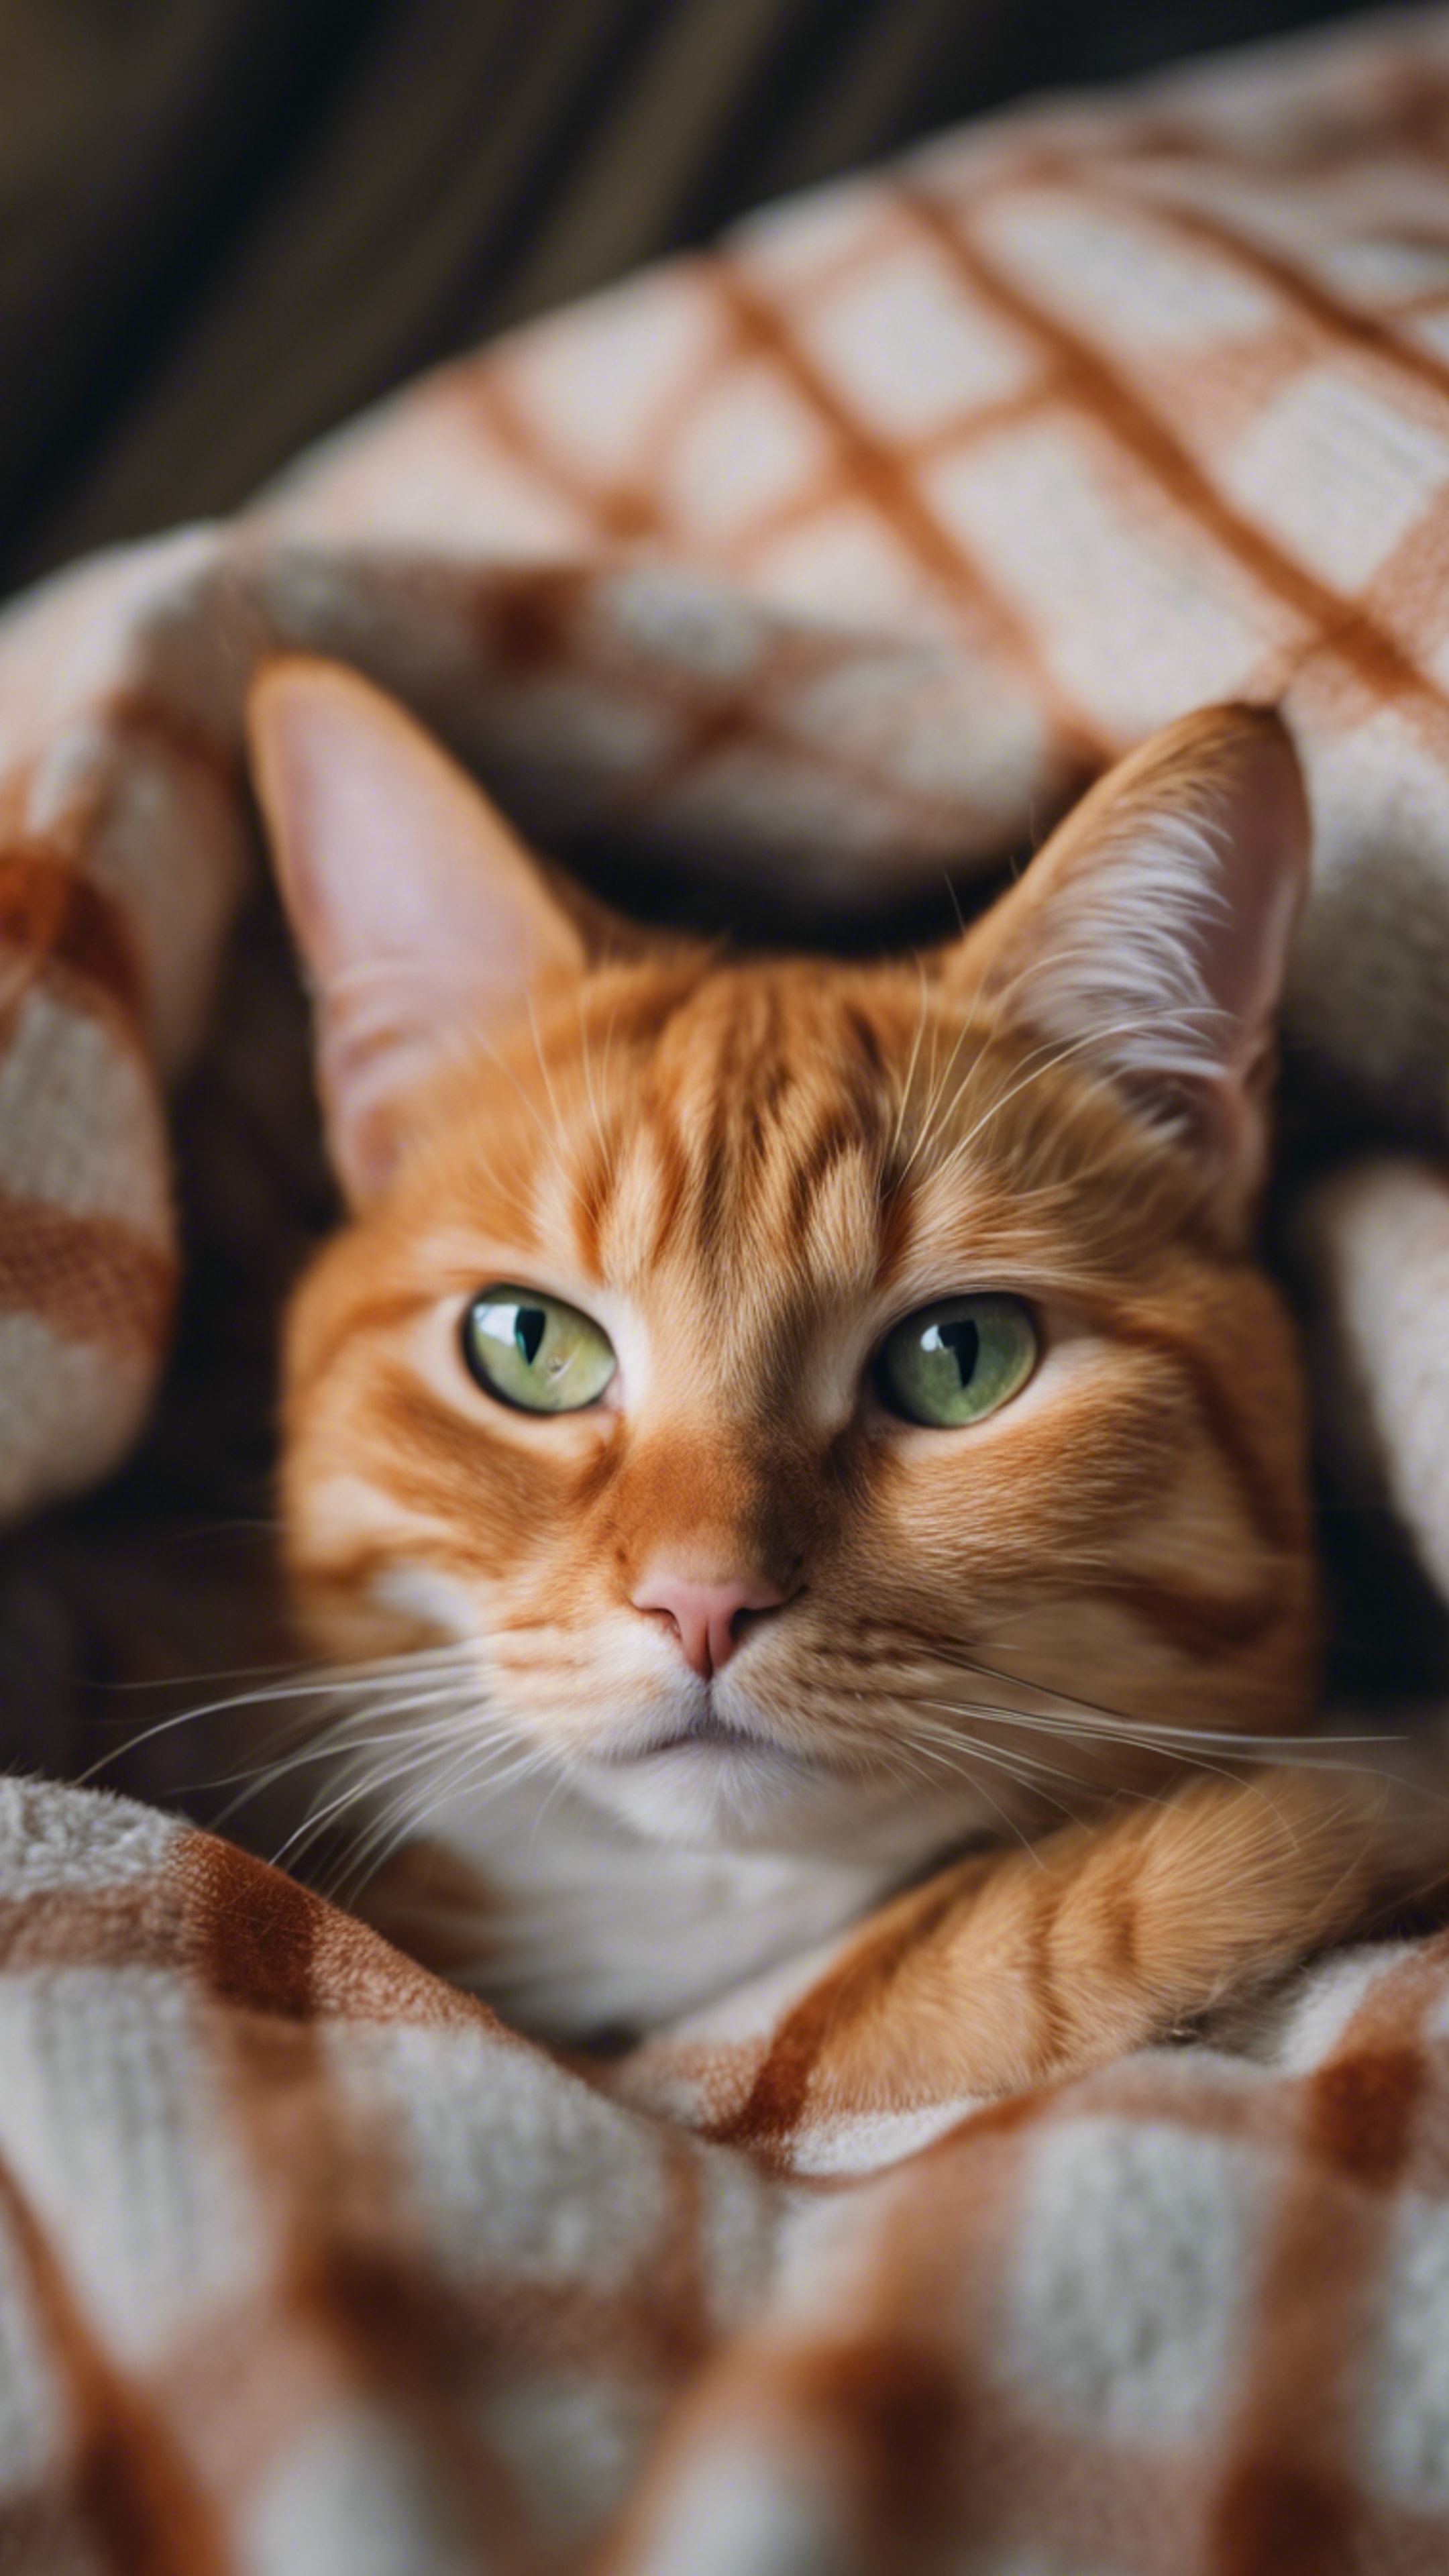 A close up of an orange tabby cat curled up on a cozy plaid blanket, purring gently, with a playful glint in its eyes. Tapeta[45e4538616504ff6a891]